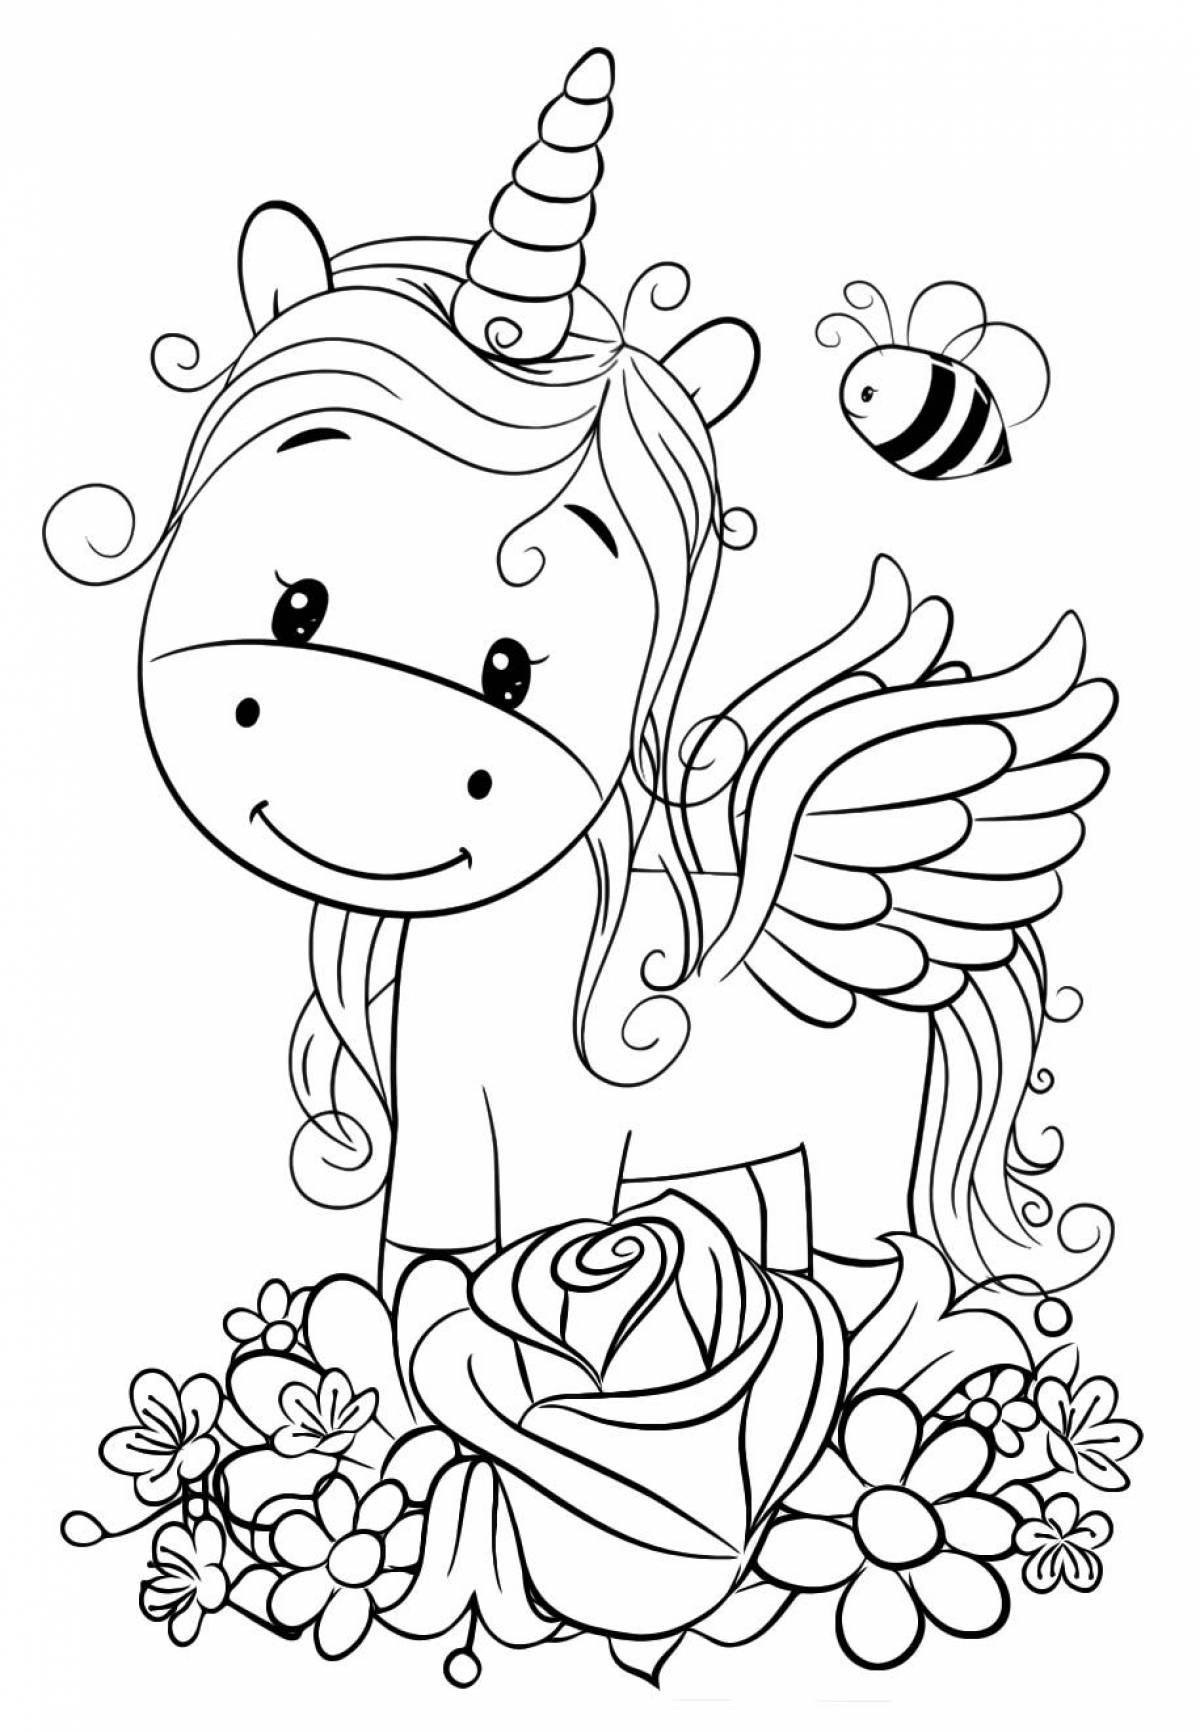 Coloring book for unicorn girls